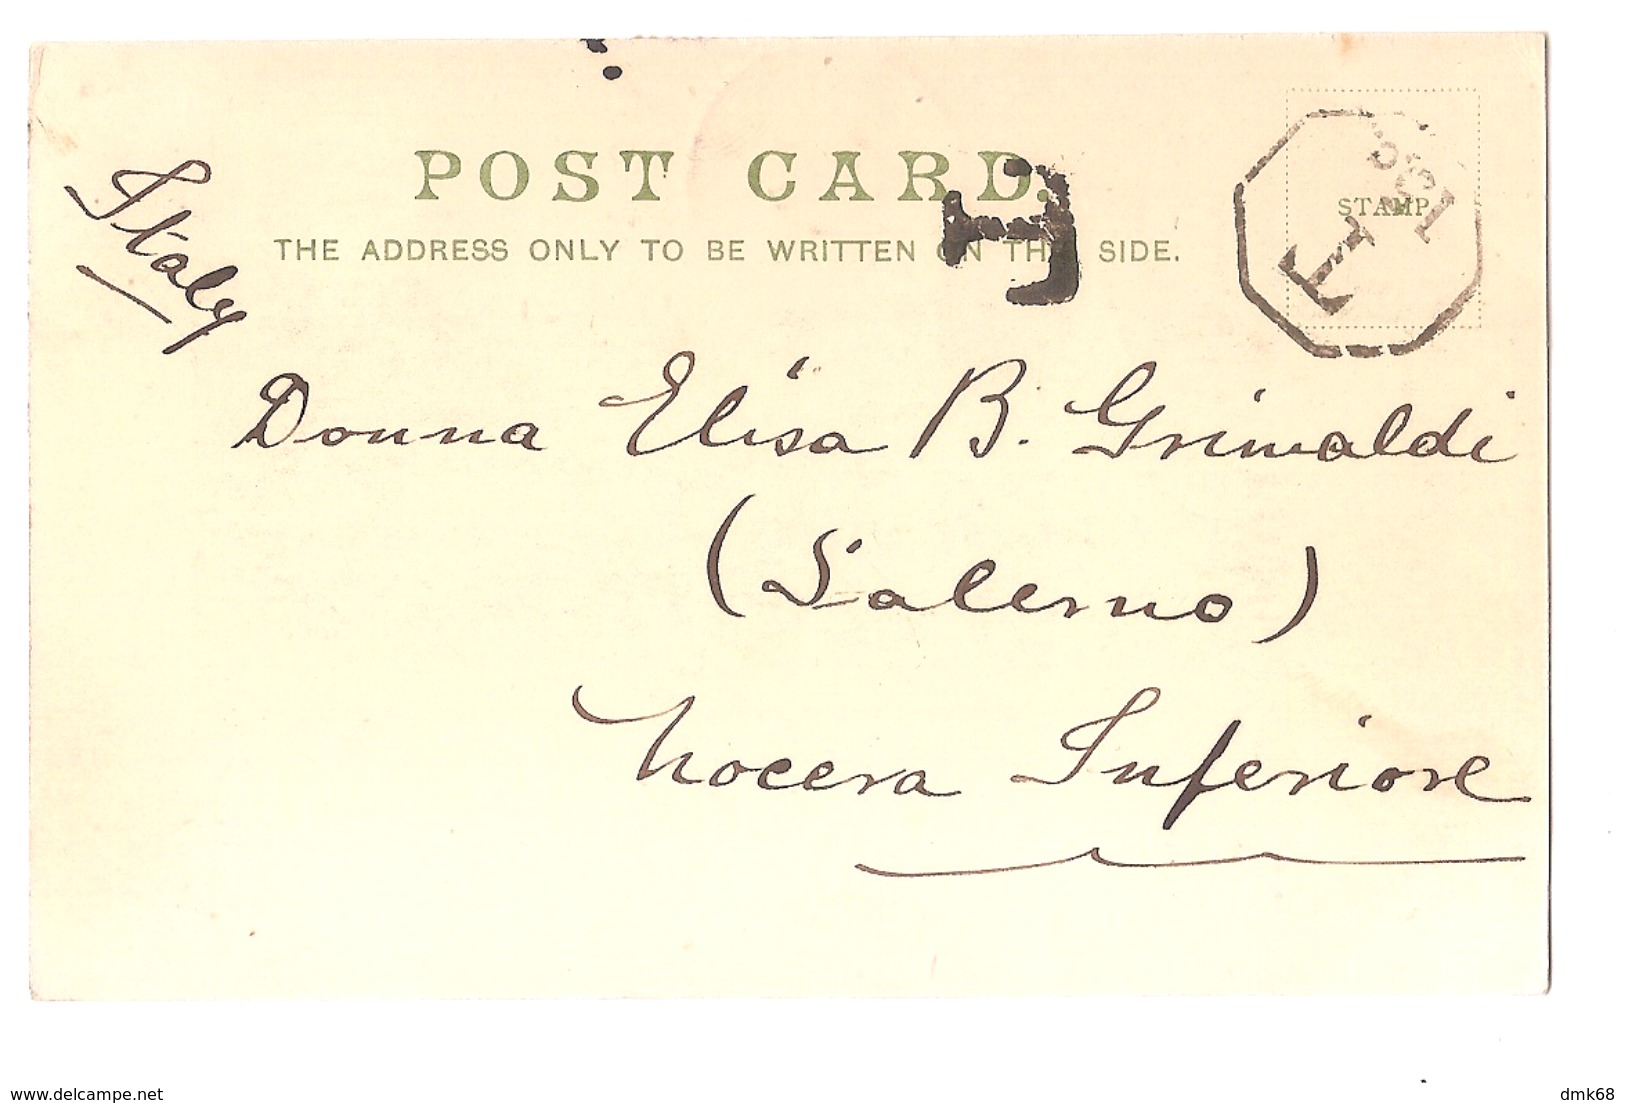 SOUTH AFRICA - STREET IN KAFFIR LOCATION - EAST LONDON - STAMP - MAILED TO ITALY 1902 - ( 2779) - Afrique Du Sud